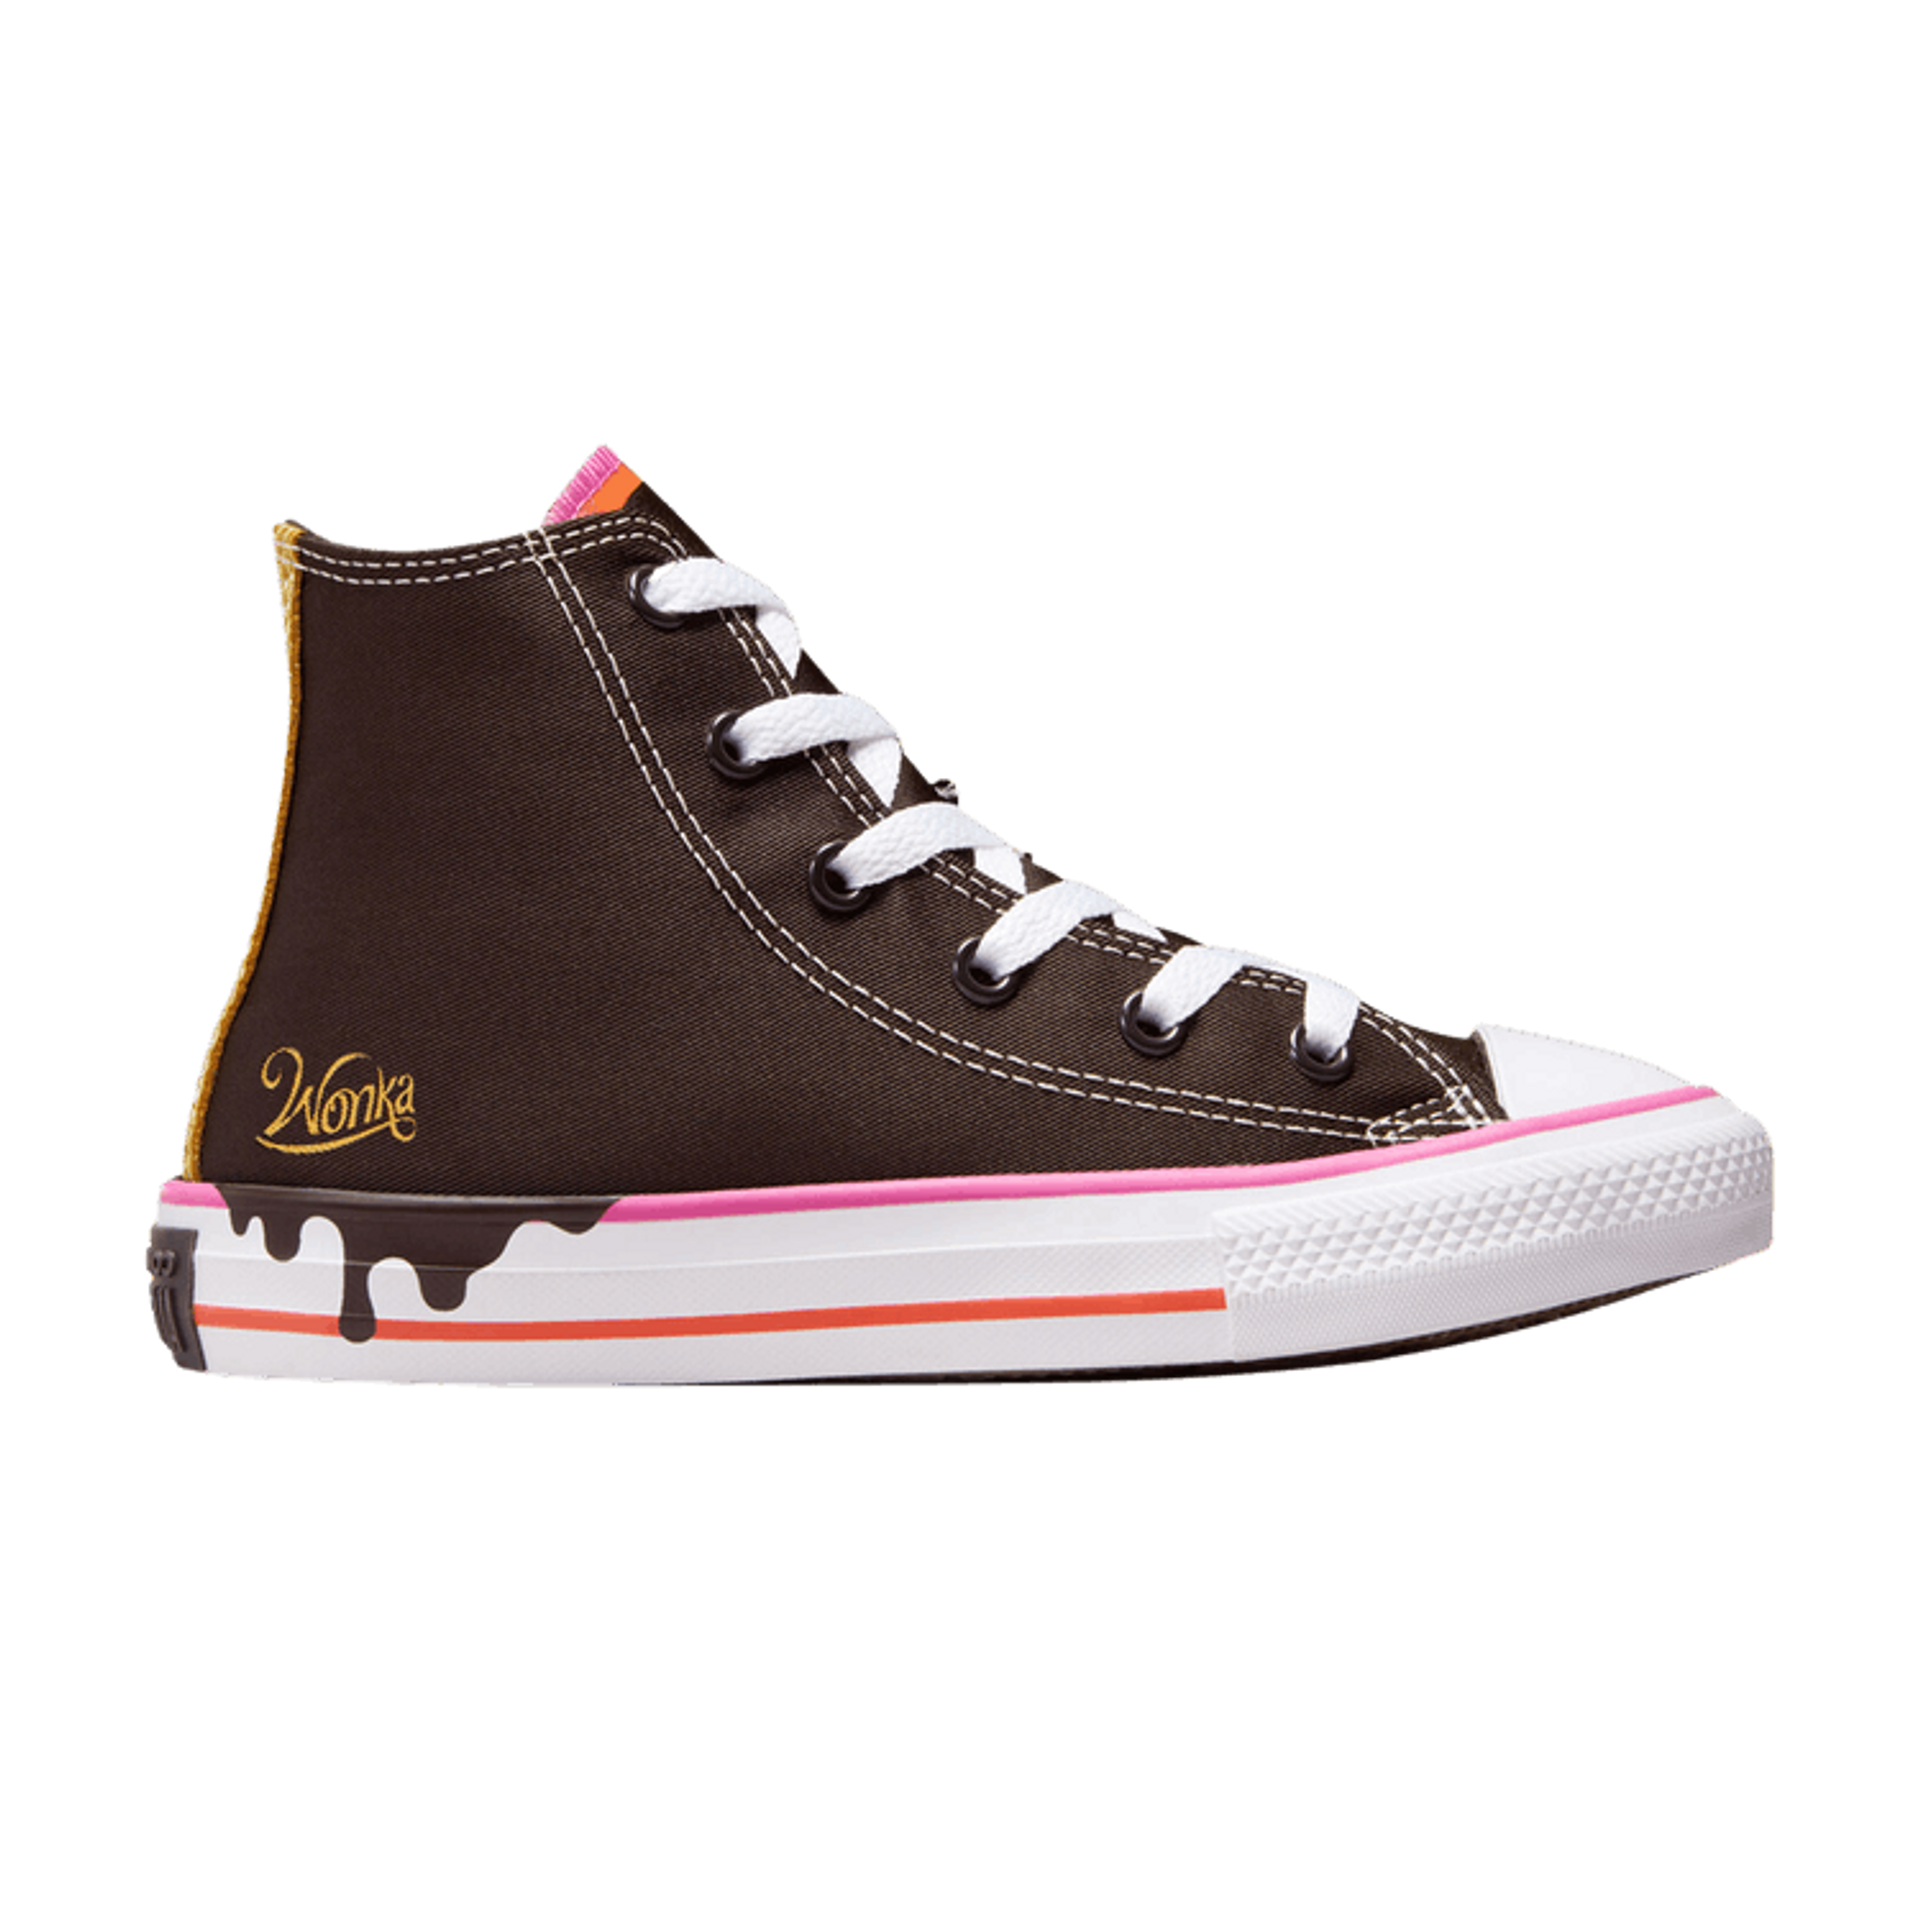 Willy Wonka x Converse Chuck Taylor All Star High PS 'Chocolate Drip'